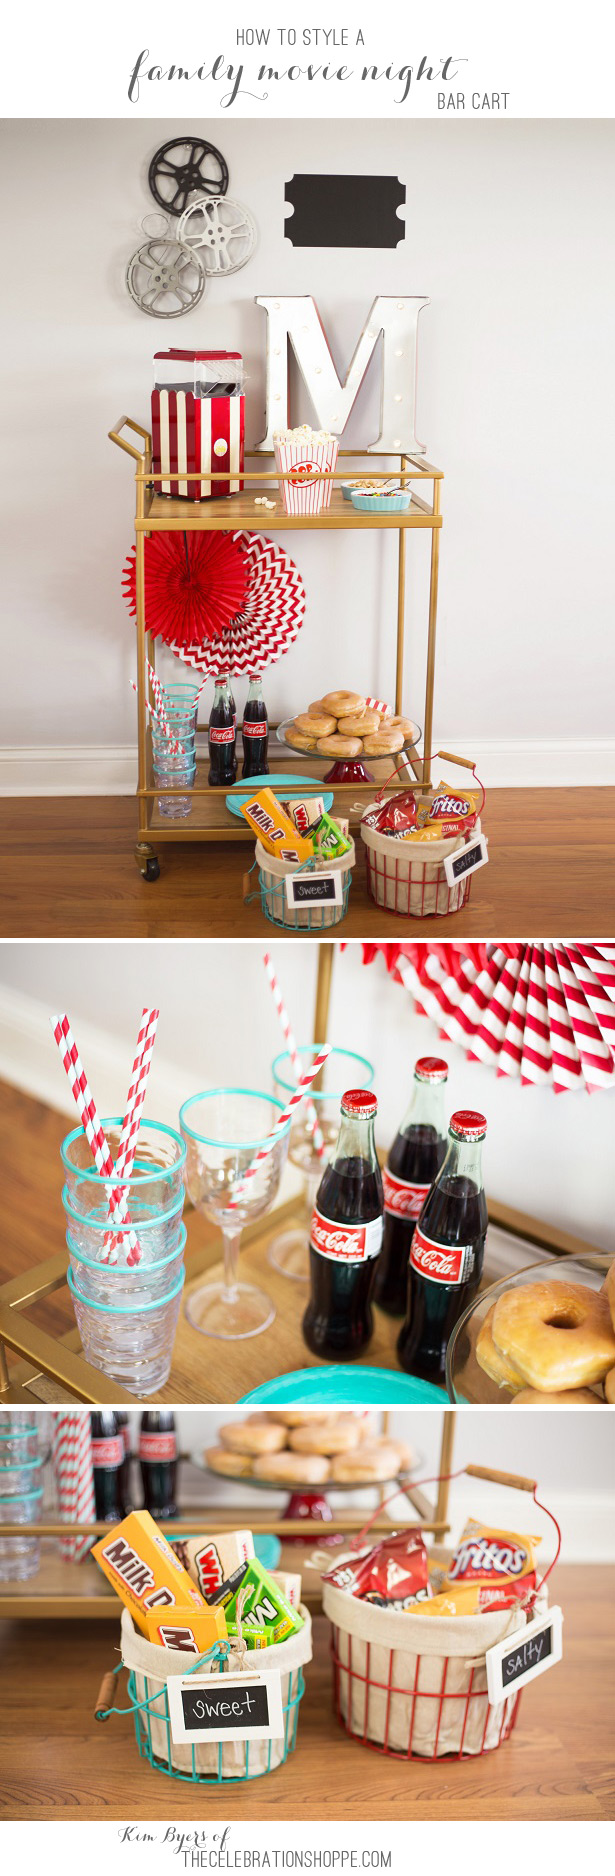 How To Style A Bar Cart